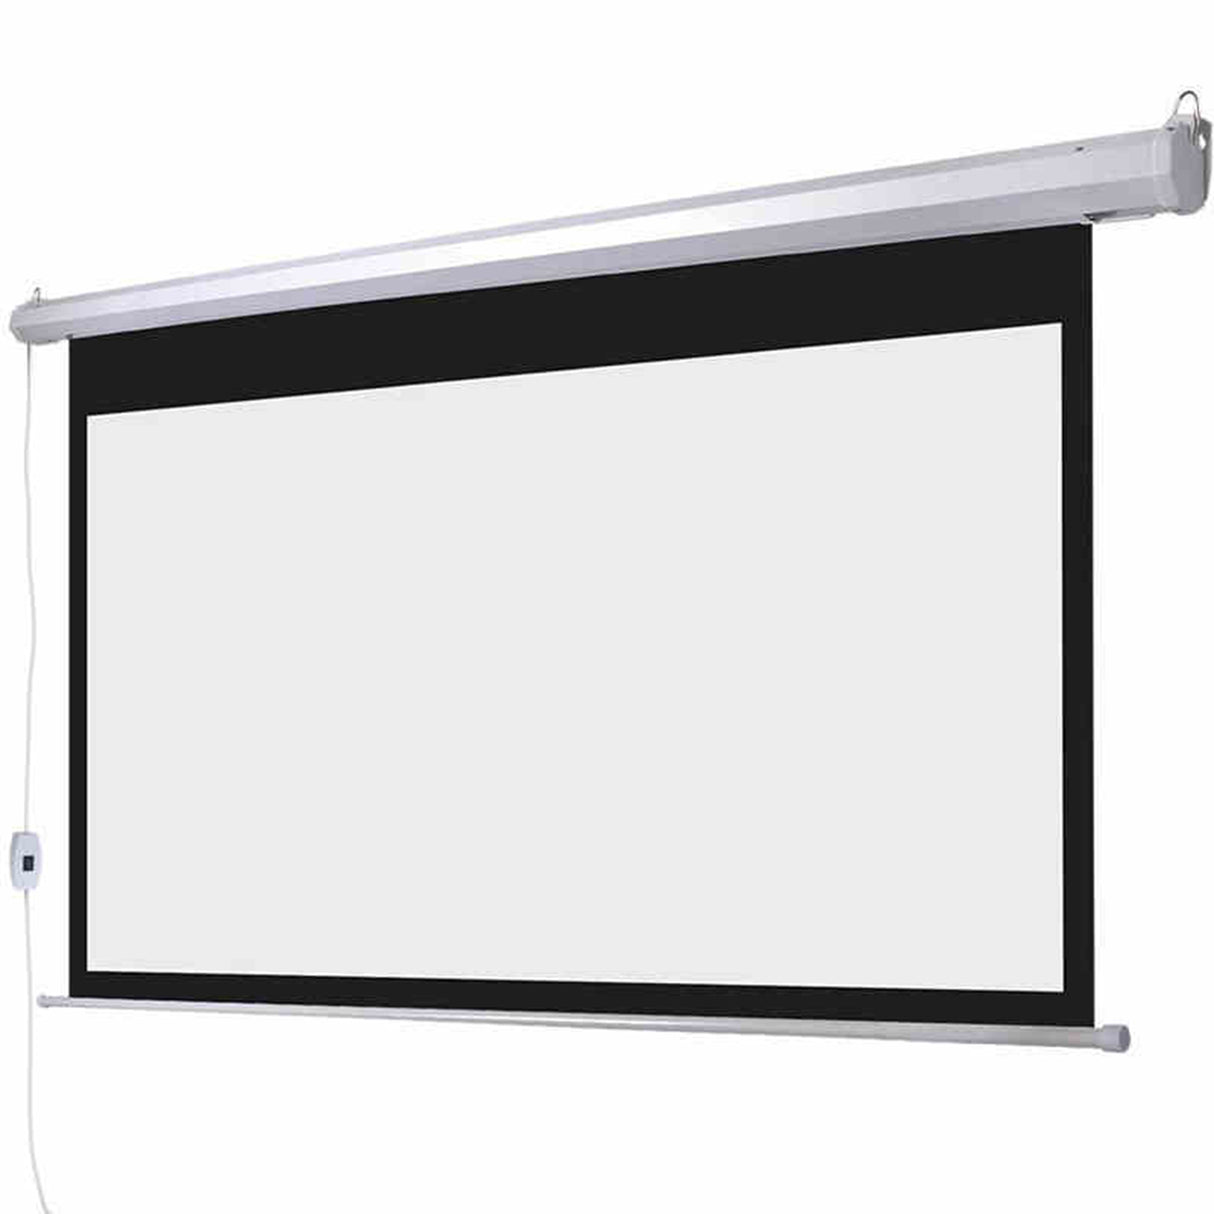 RNT Projection Screen Motorised 133 Inches - 16:9 Ratio